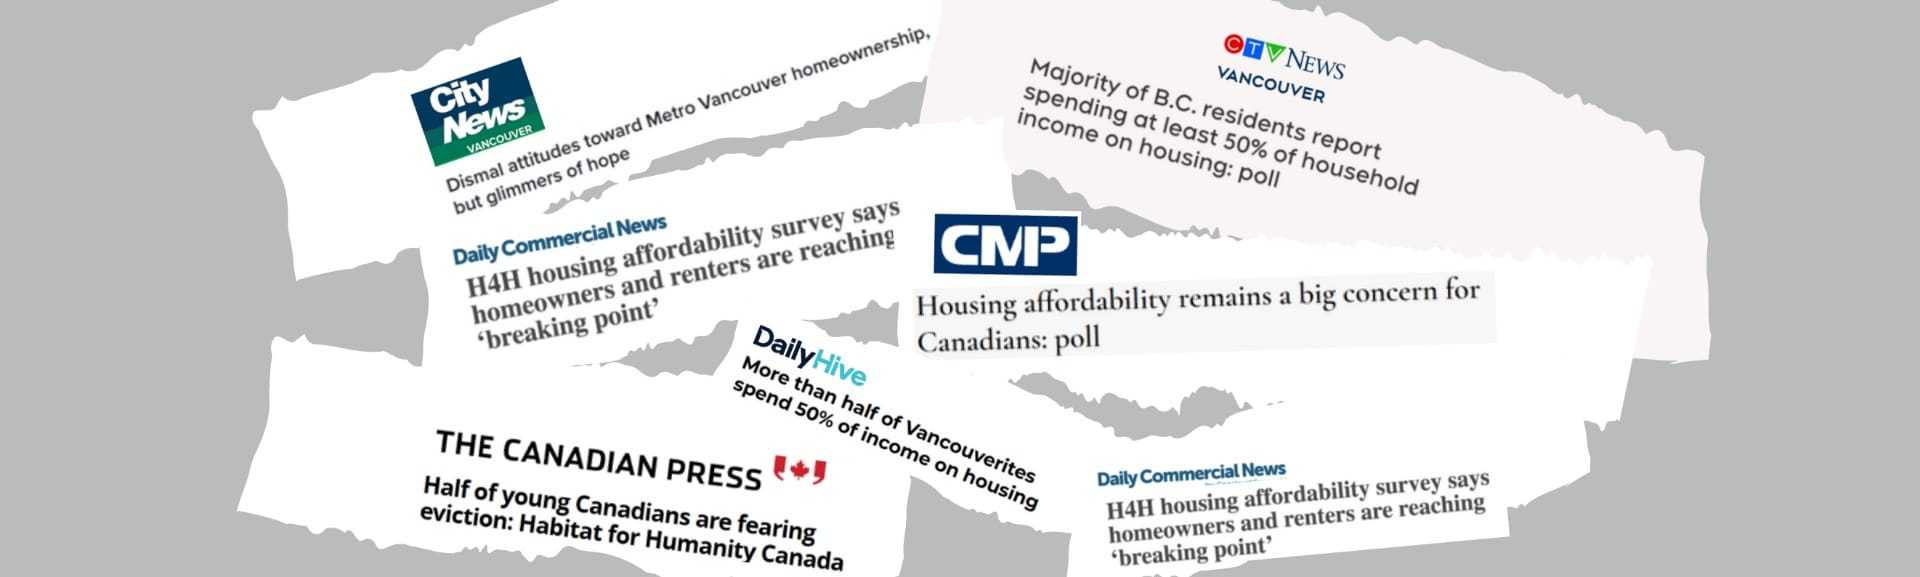 Collage of different articles showing that Canadians increasingly spend more of their income on housing